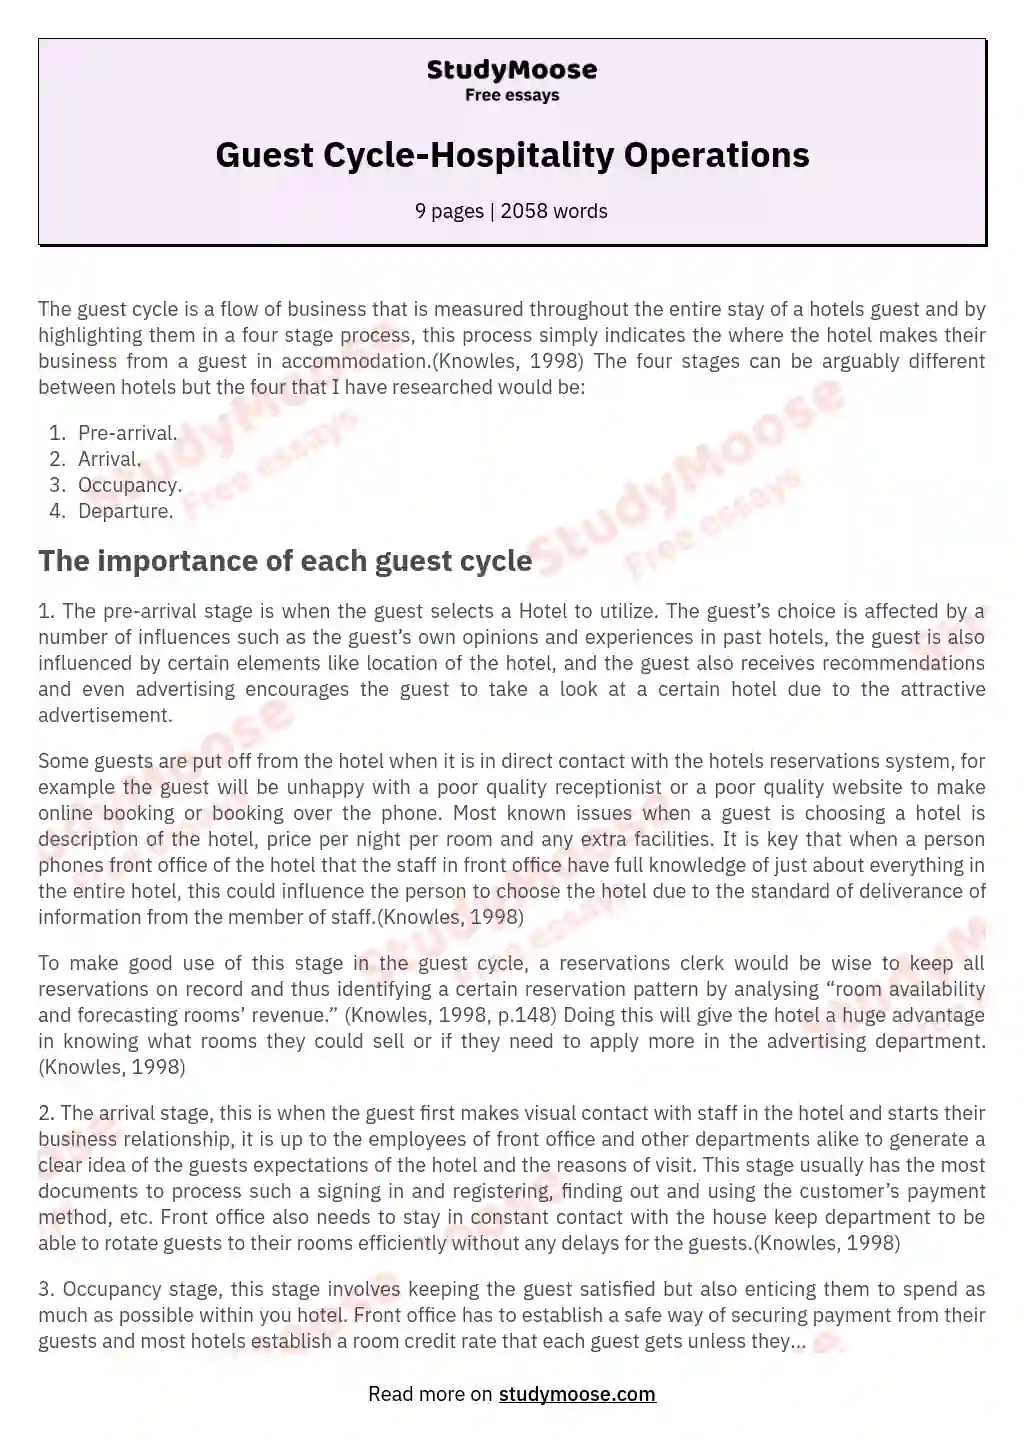 Guest Cycle-Hospitality Operations essay